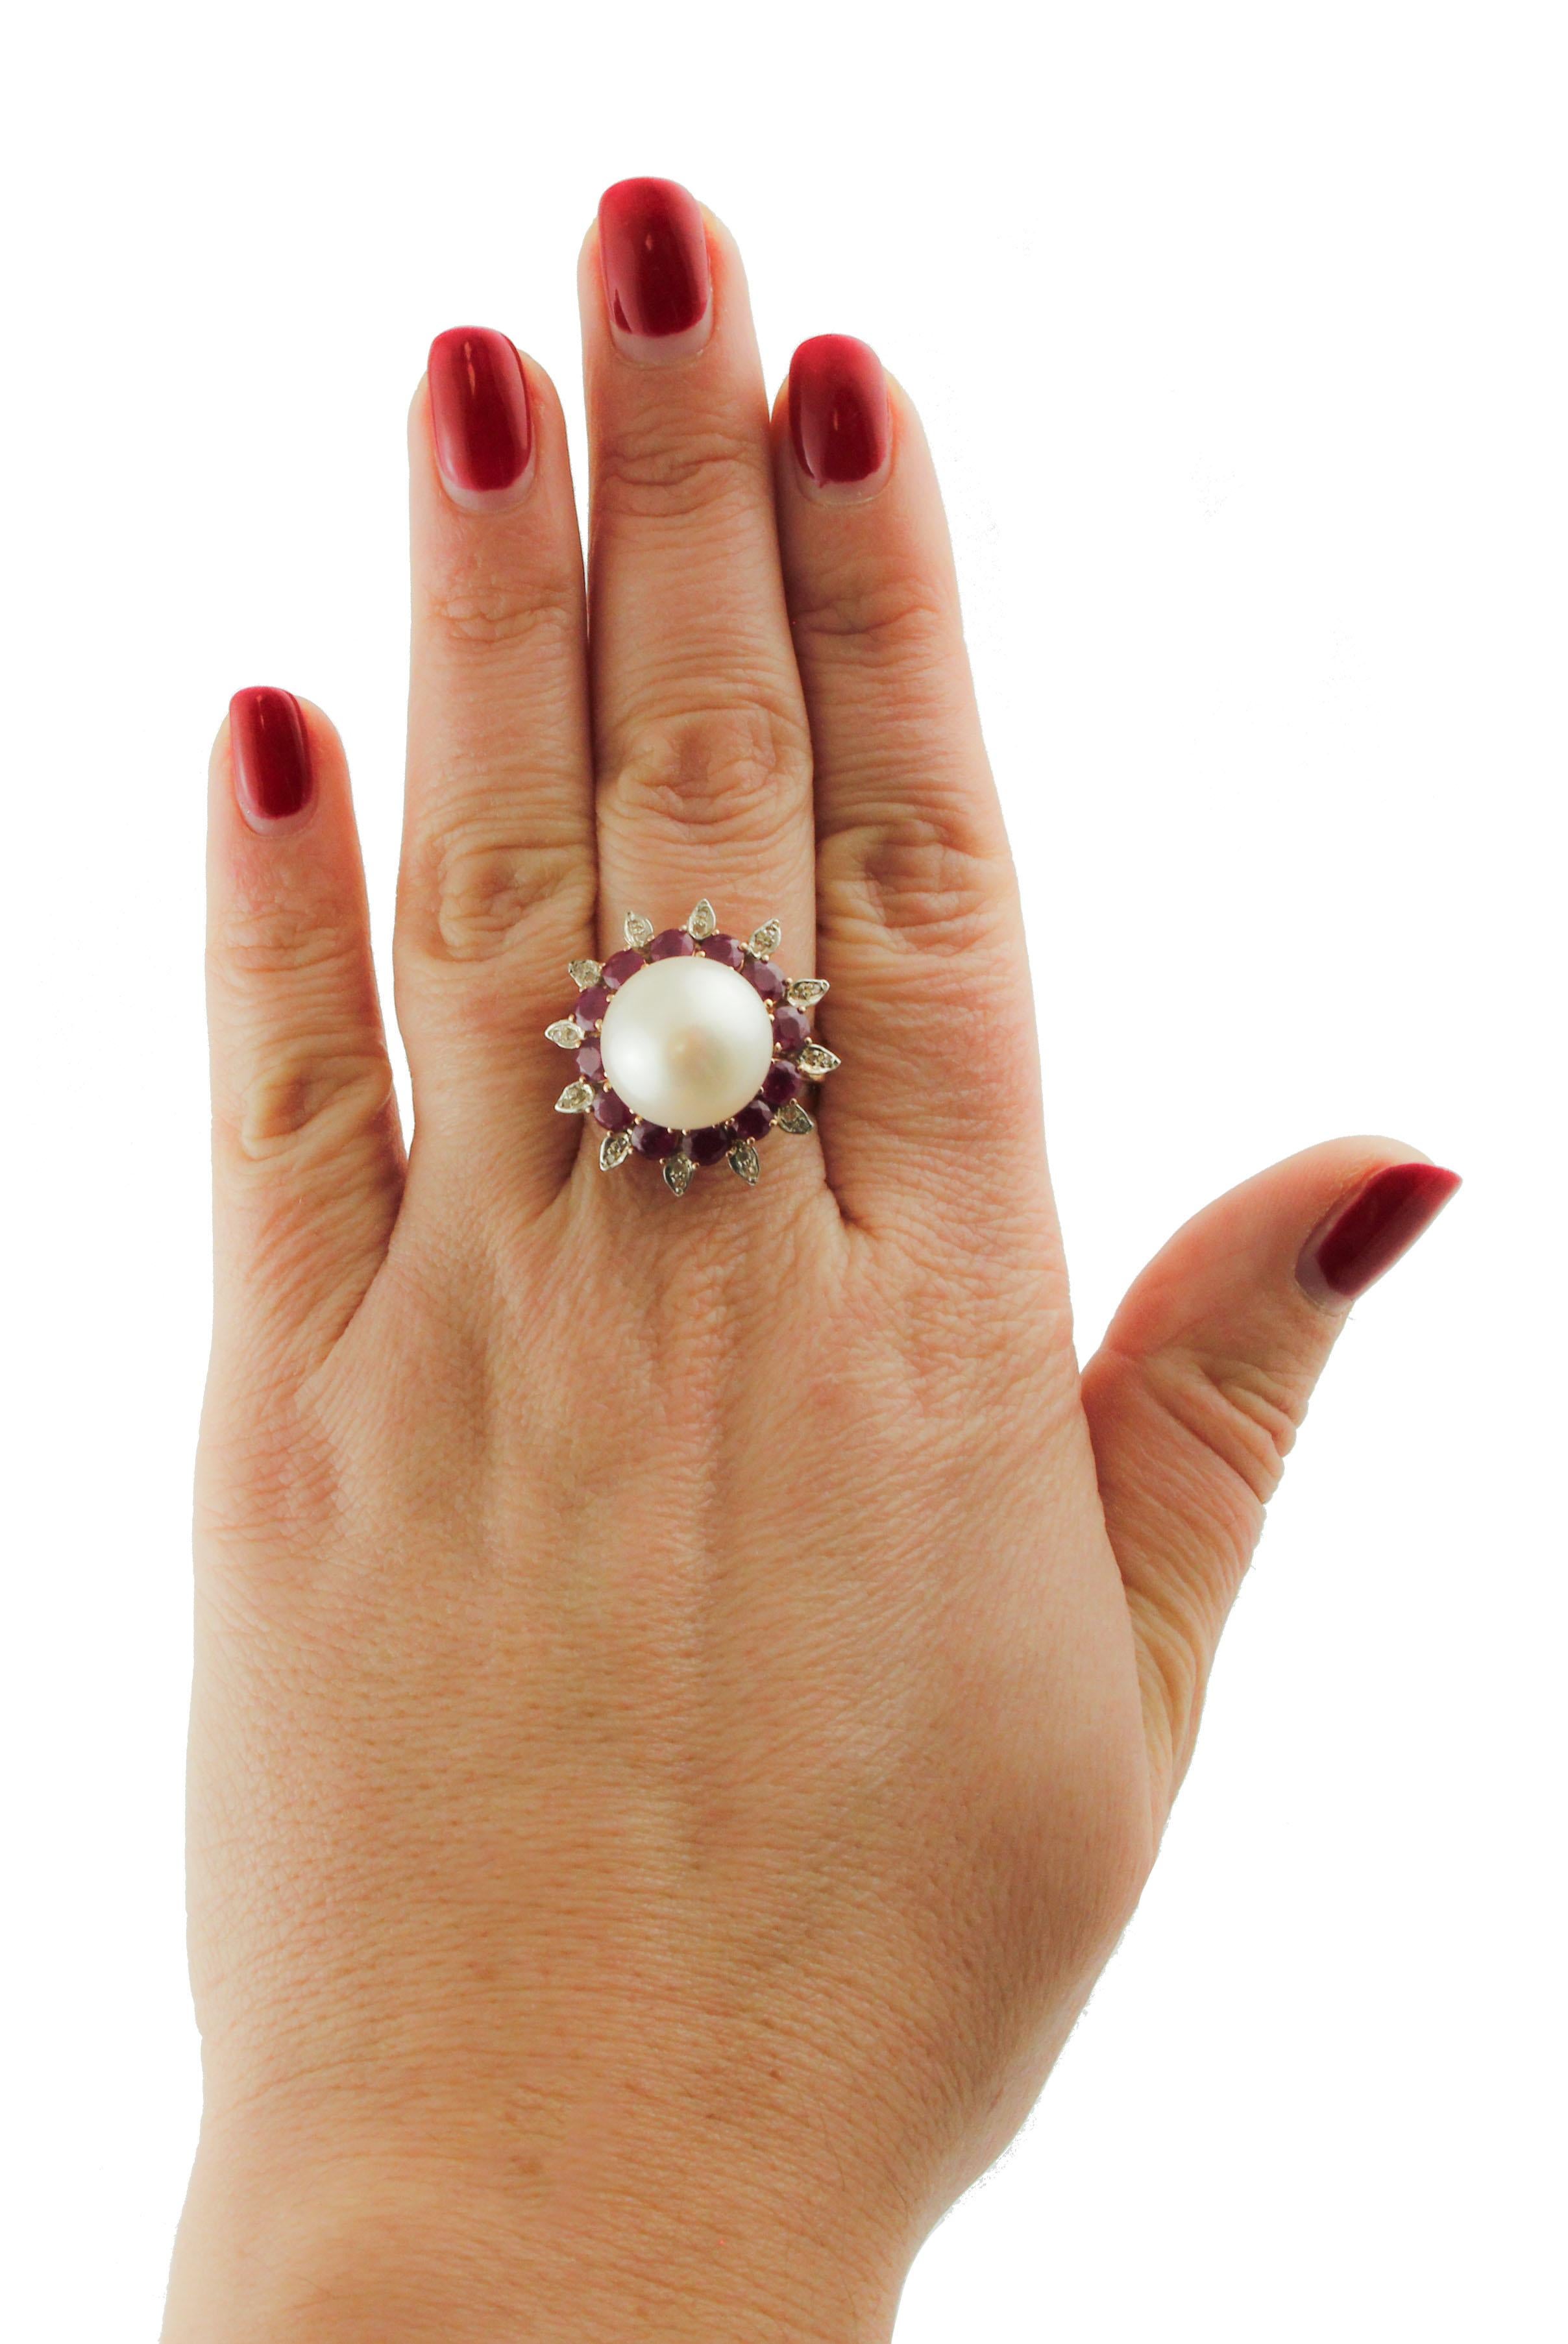 Diamonds, Rubies, White Pearl, Rose Gold and Silver Cluster Flower Ring 1